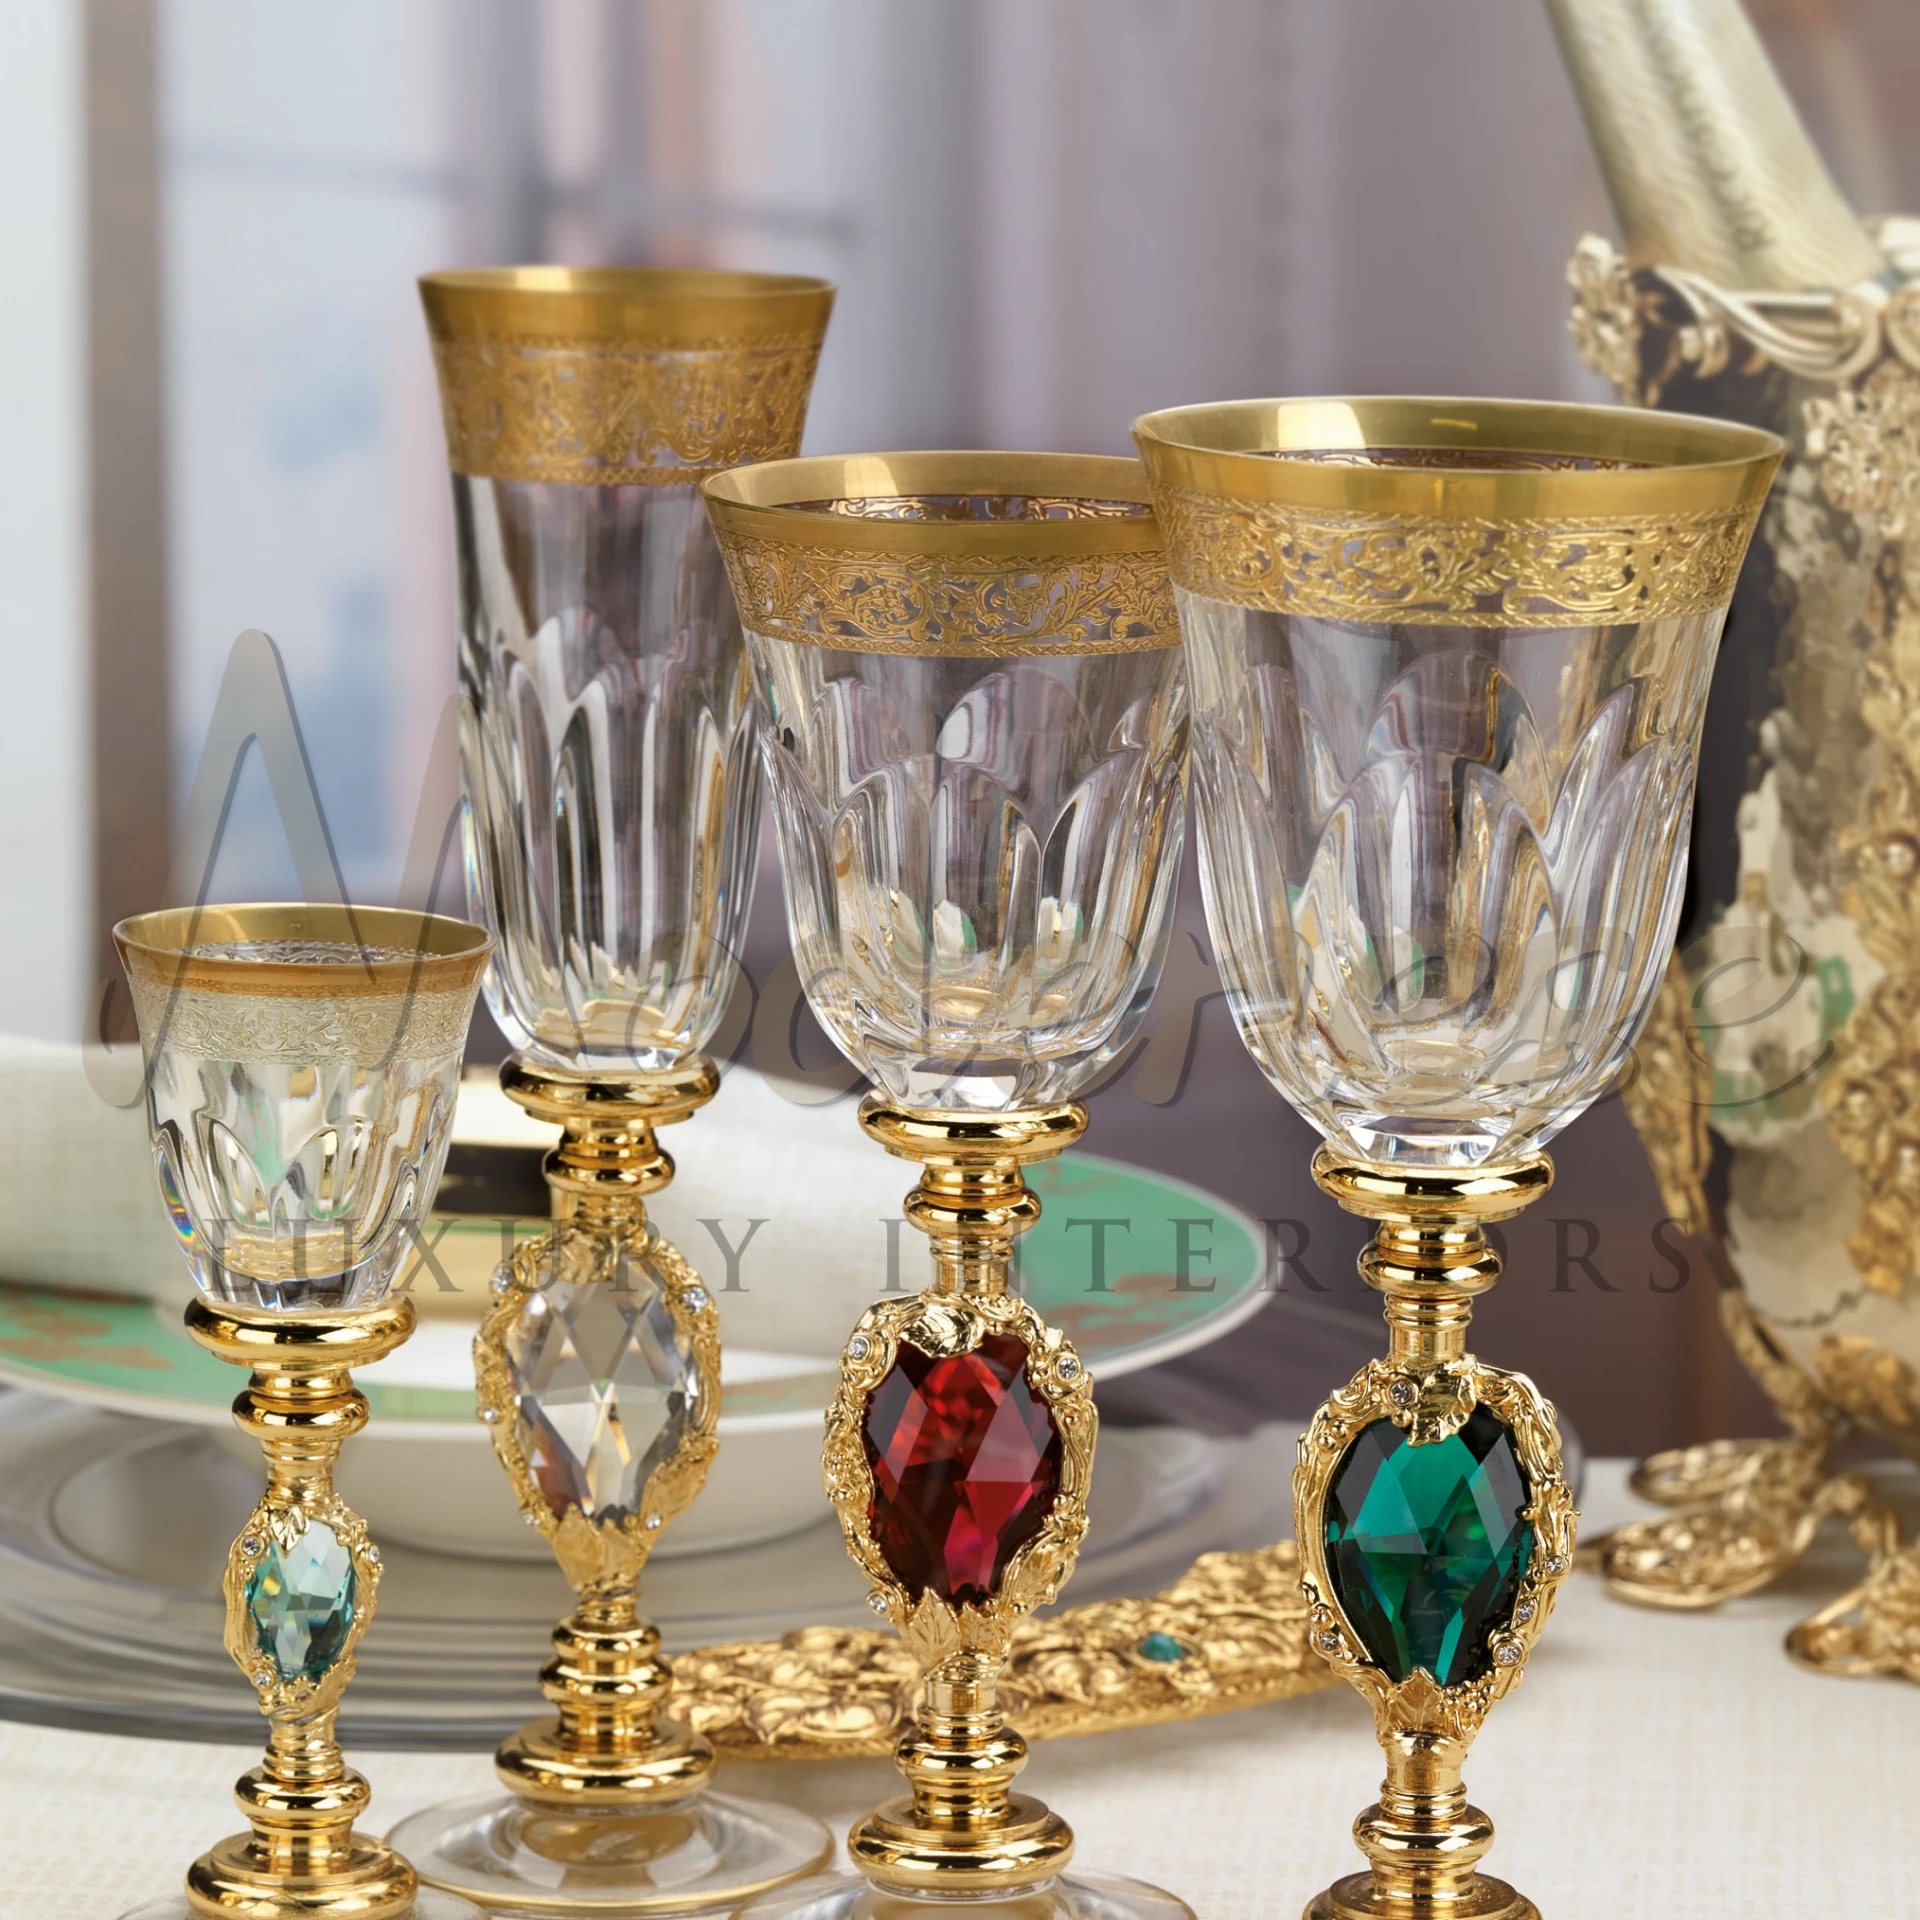 Luxurious crystal glassware with gold rims and colorful gemstones in the stems, set against an elegant dining